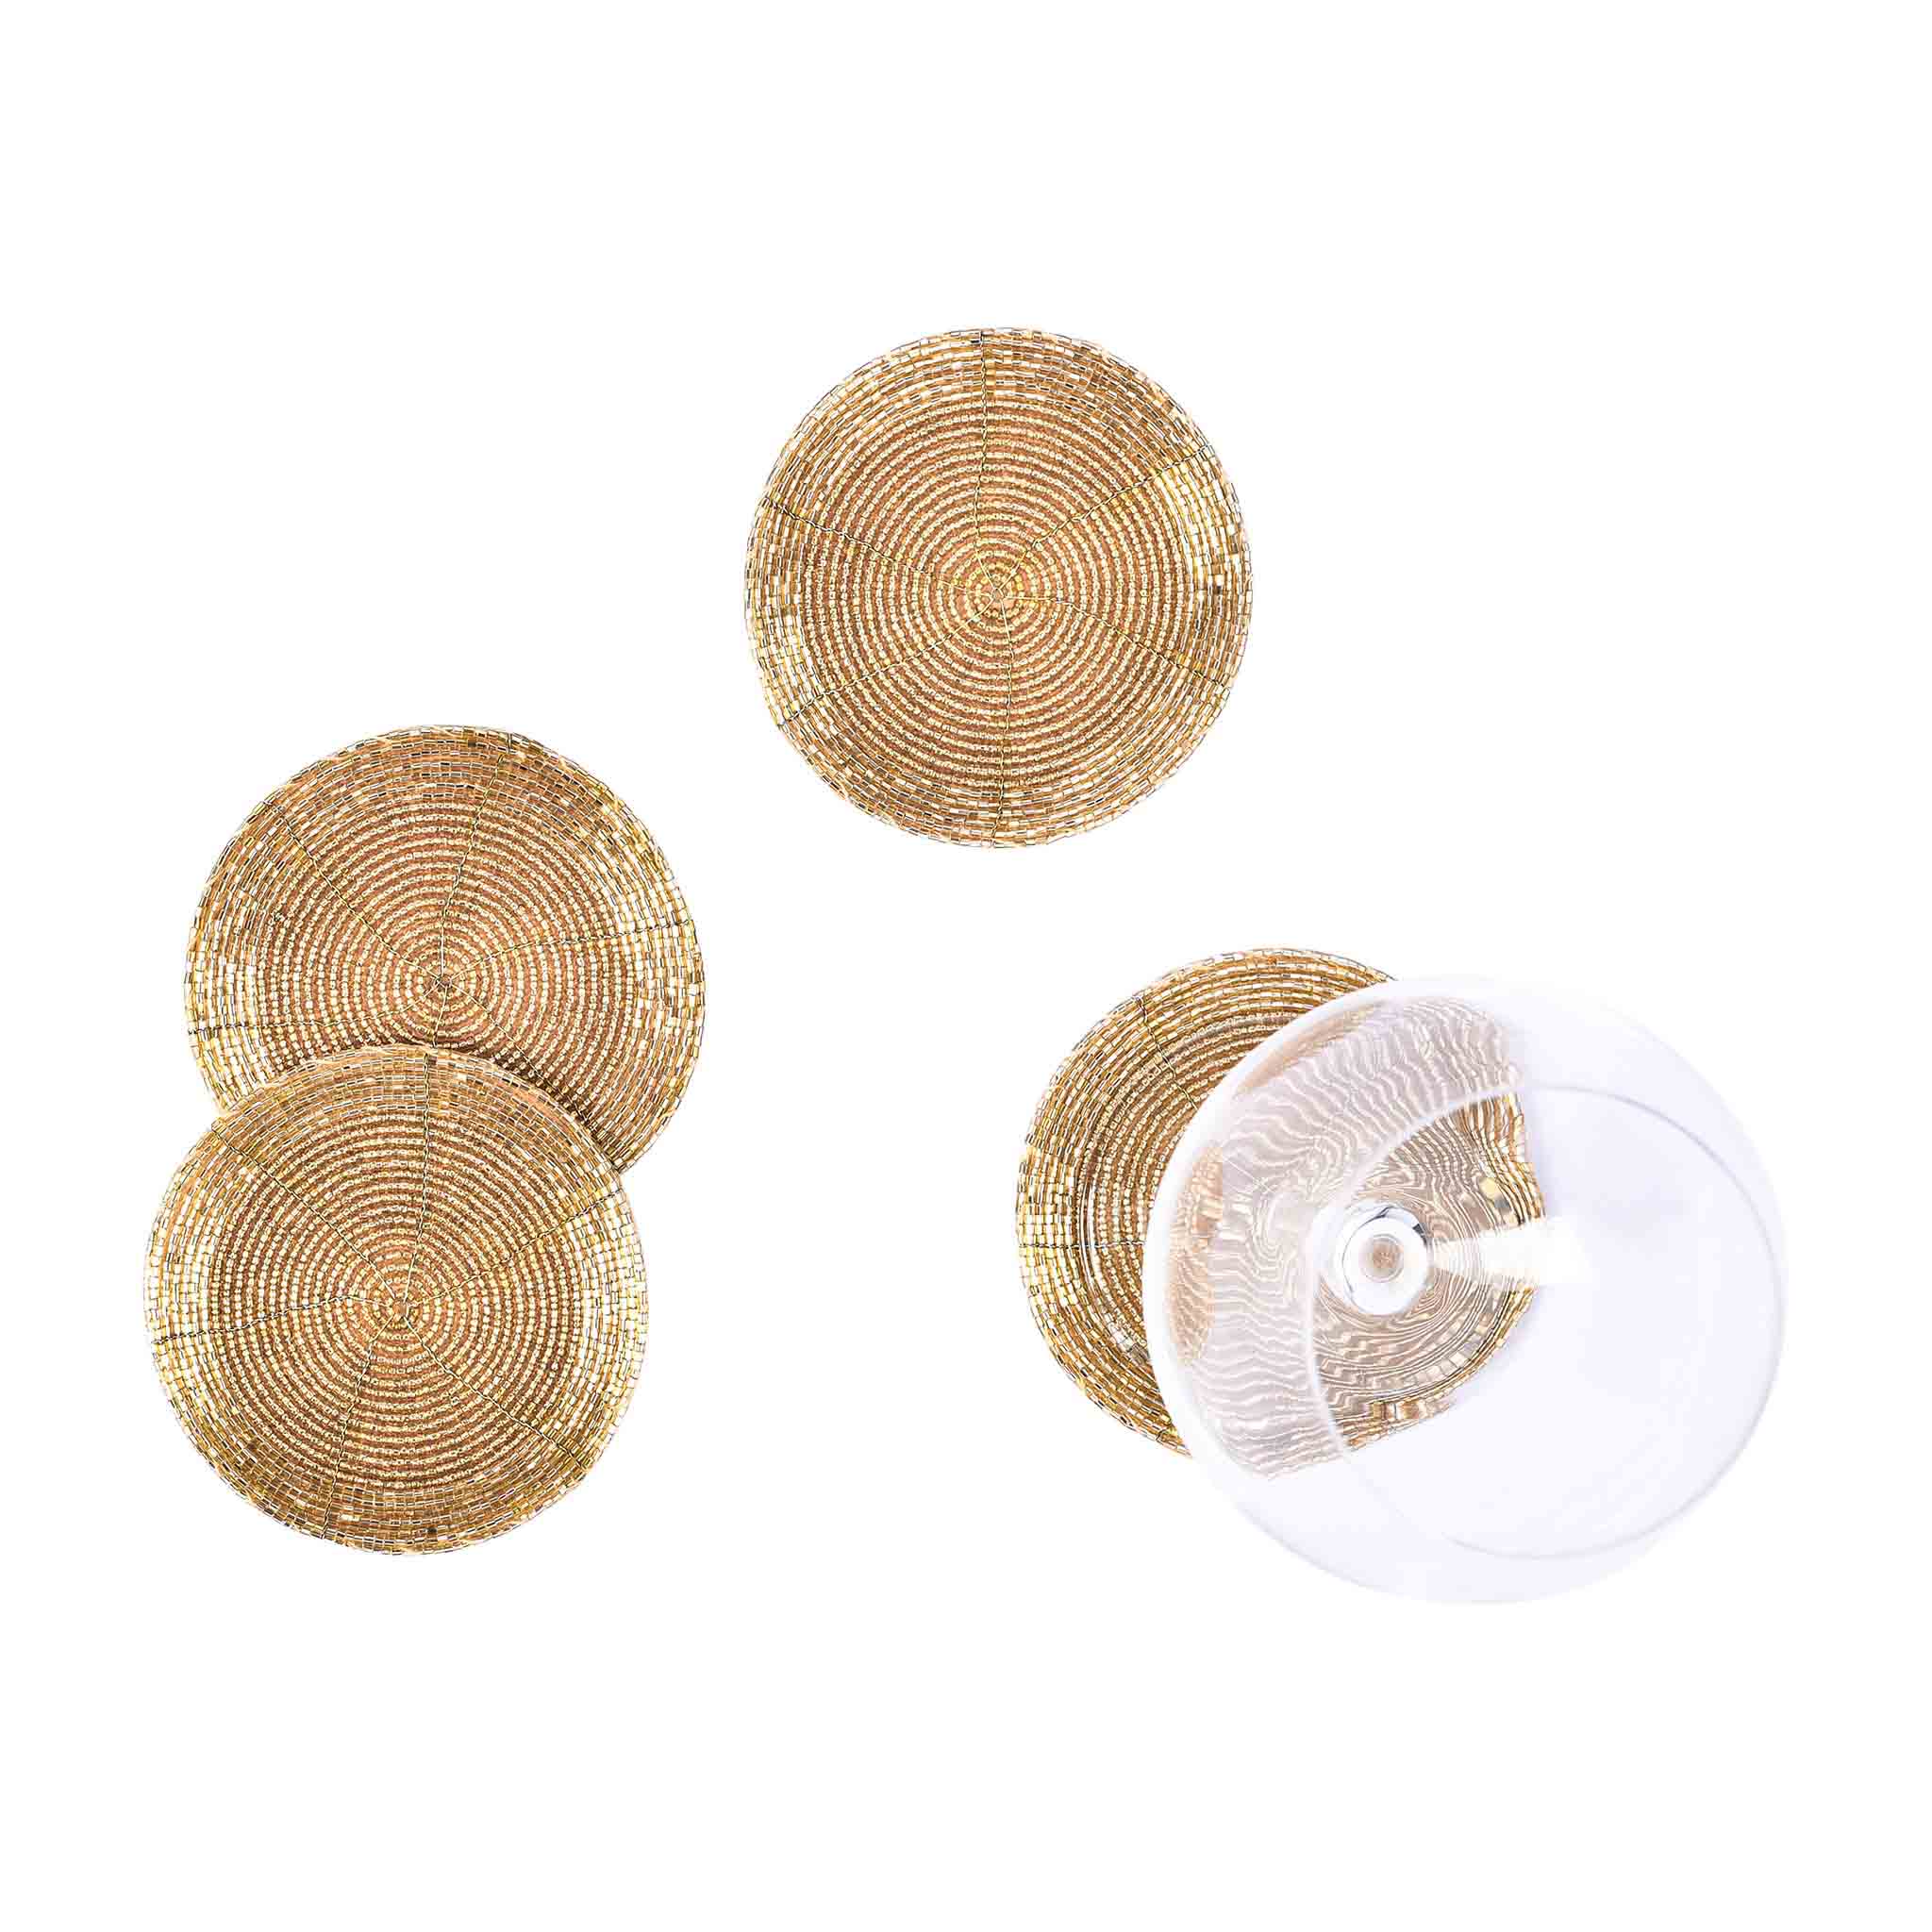 Glass Beaded Coaster in Gold, Set of 4